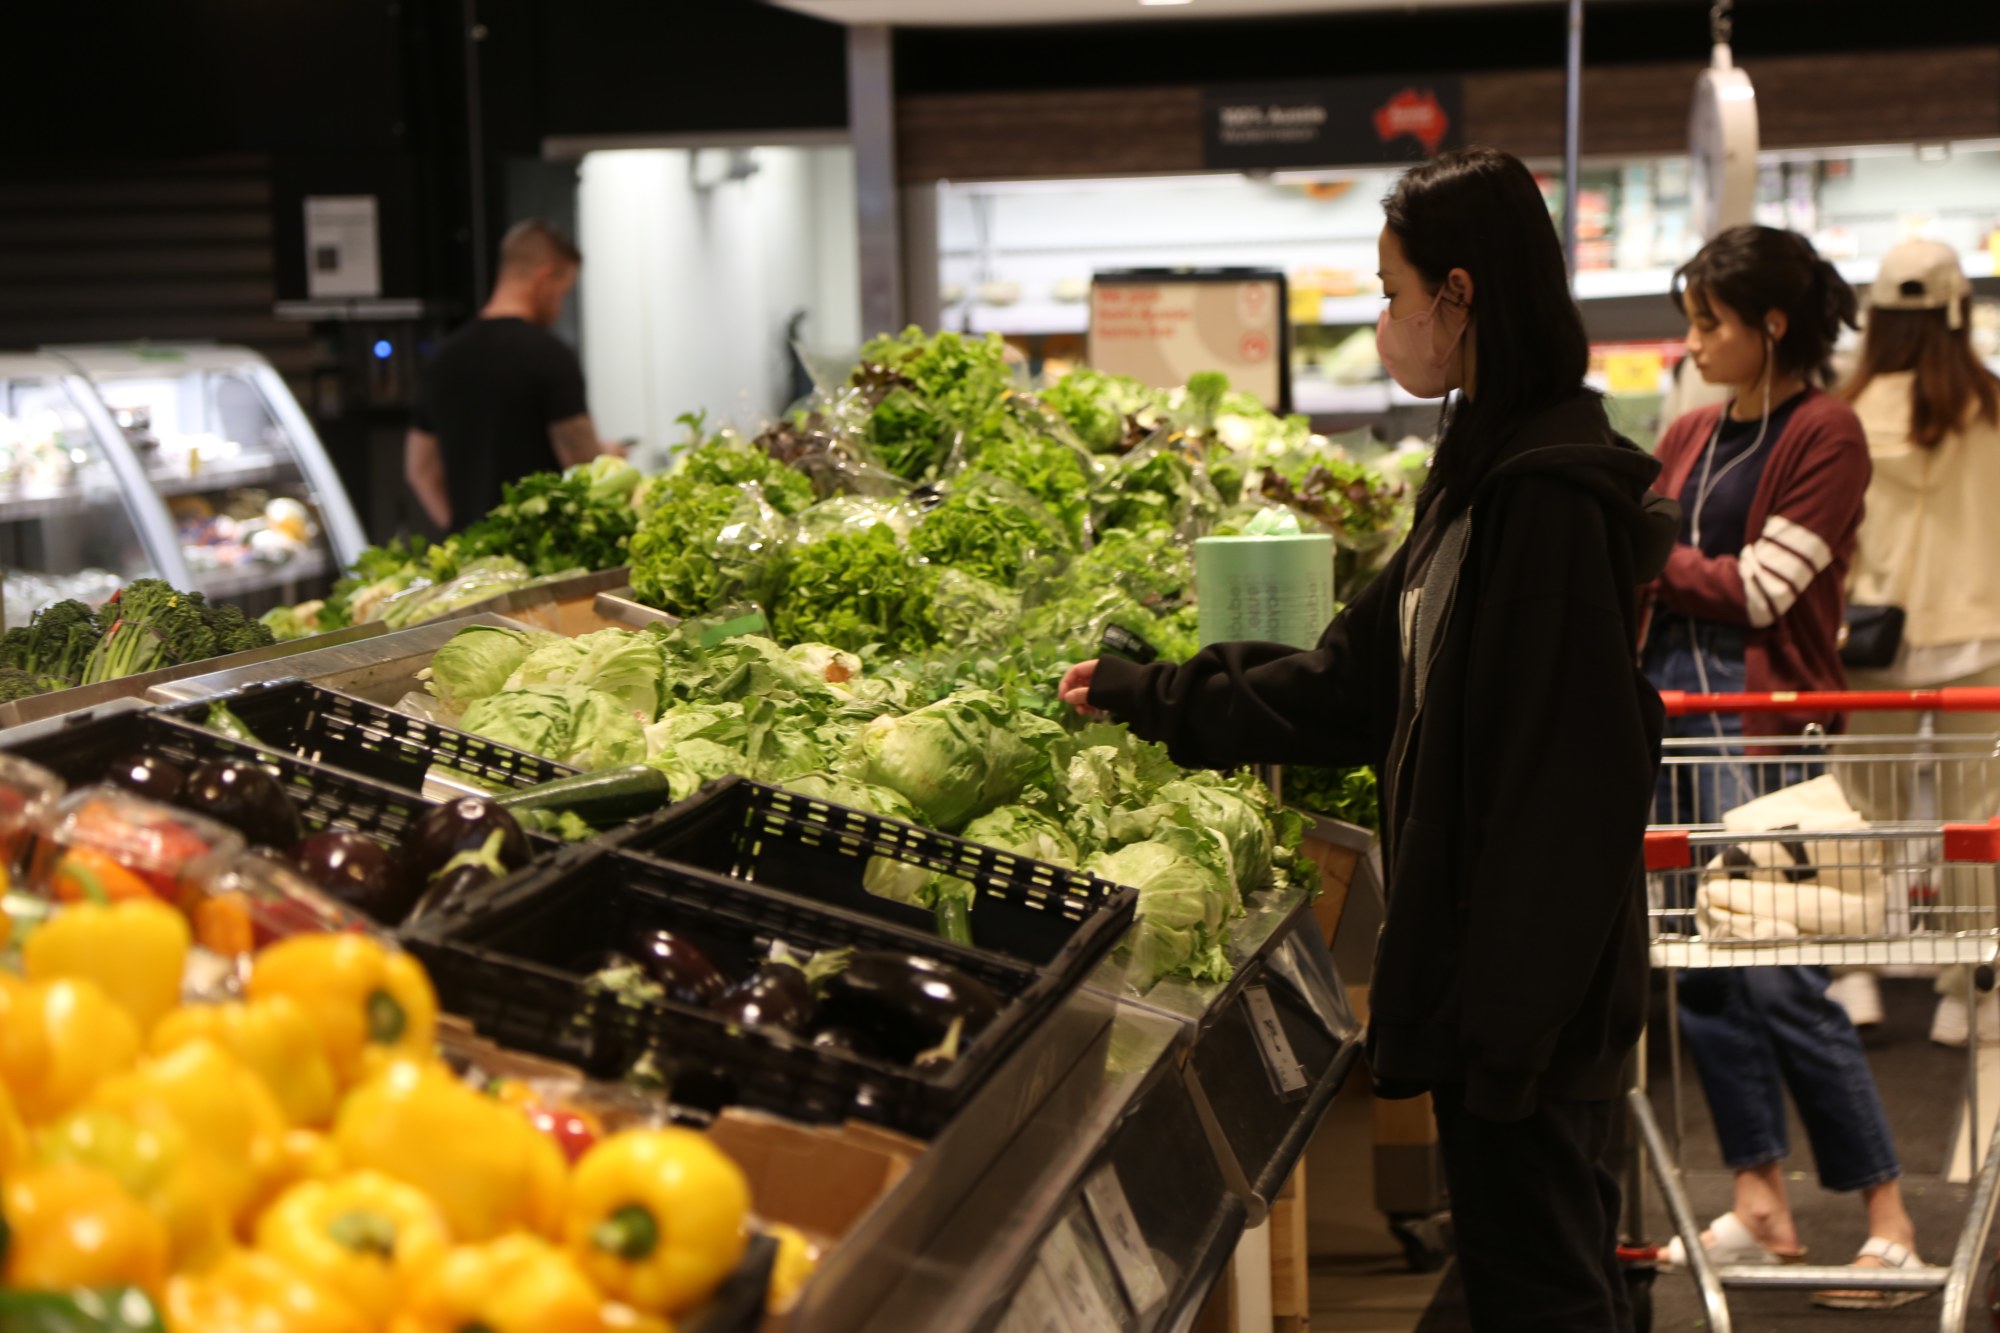 Customers shop for vegetables at a supermarket in Sydney. Officials have not confirmed where the spinach was grown or how it was contaminated. Photo: Xinhua